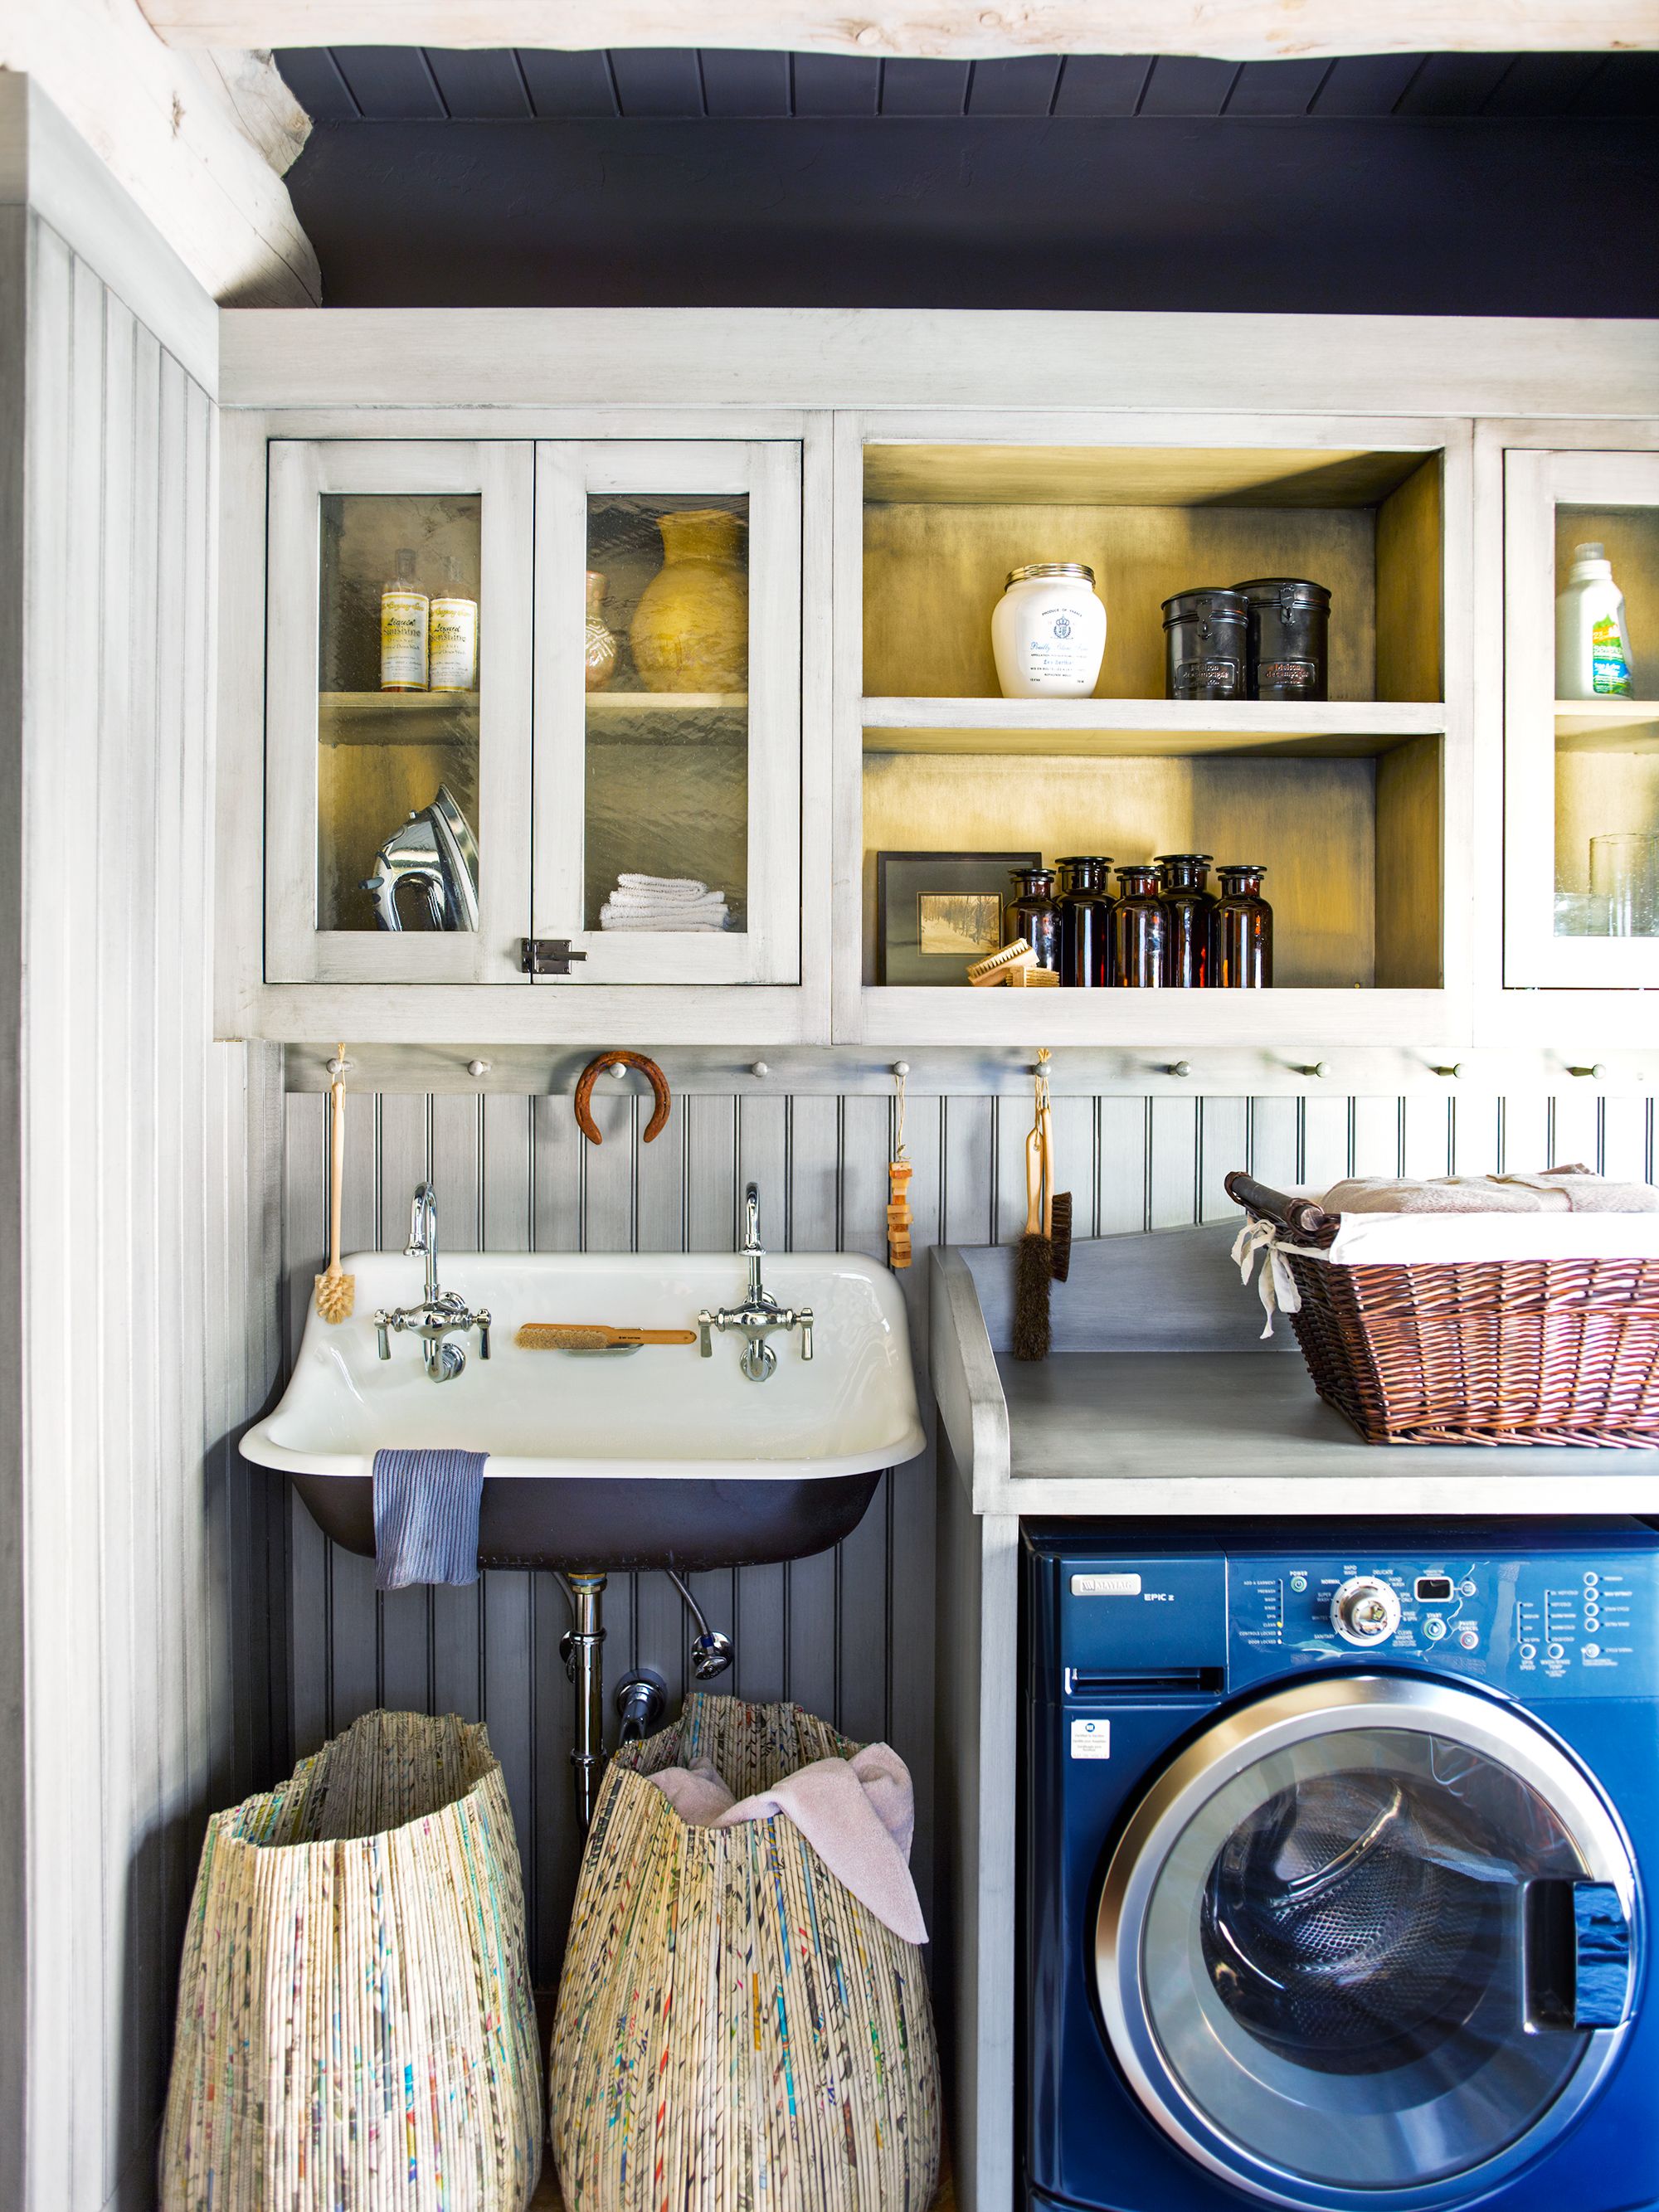 9 laundry room cabinet ideas – inspiration for an organized efficient space